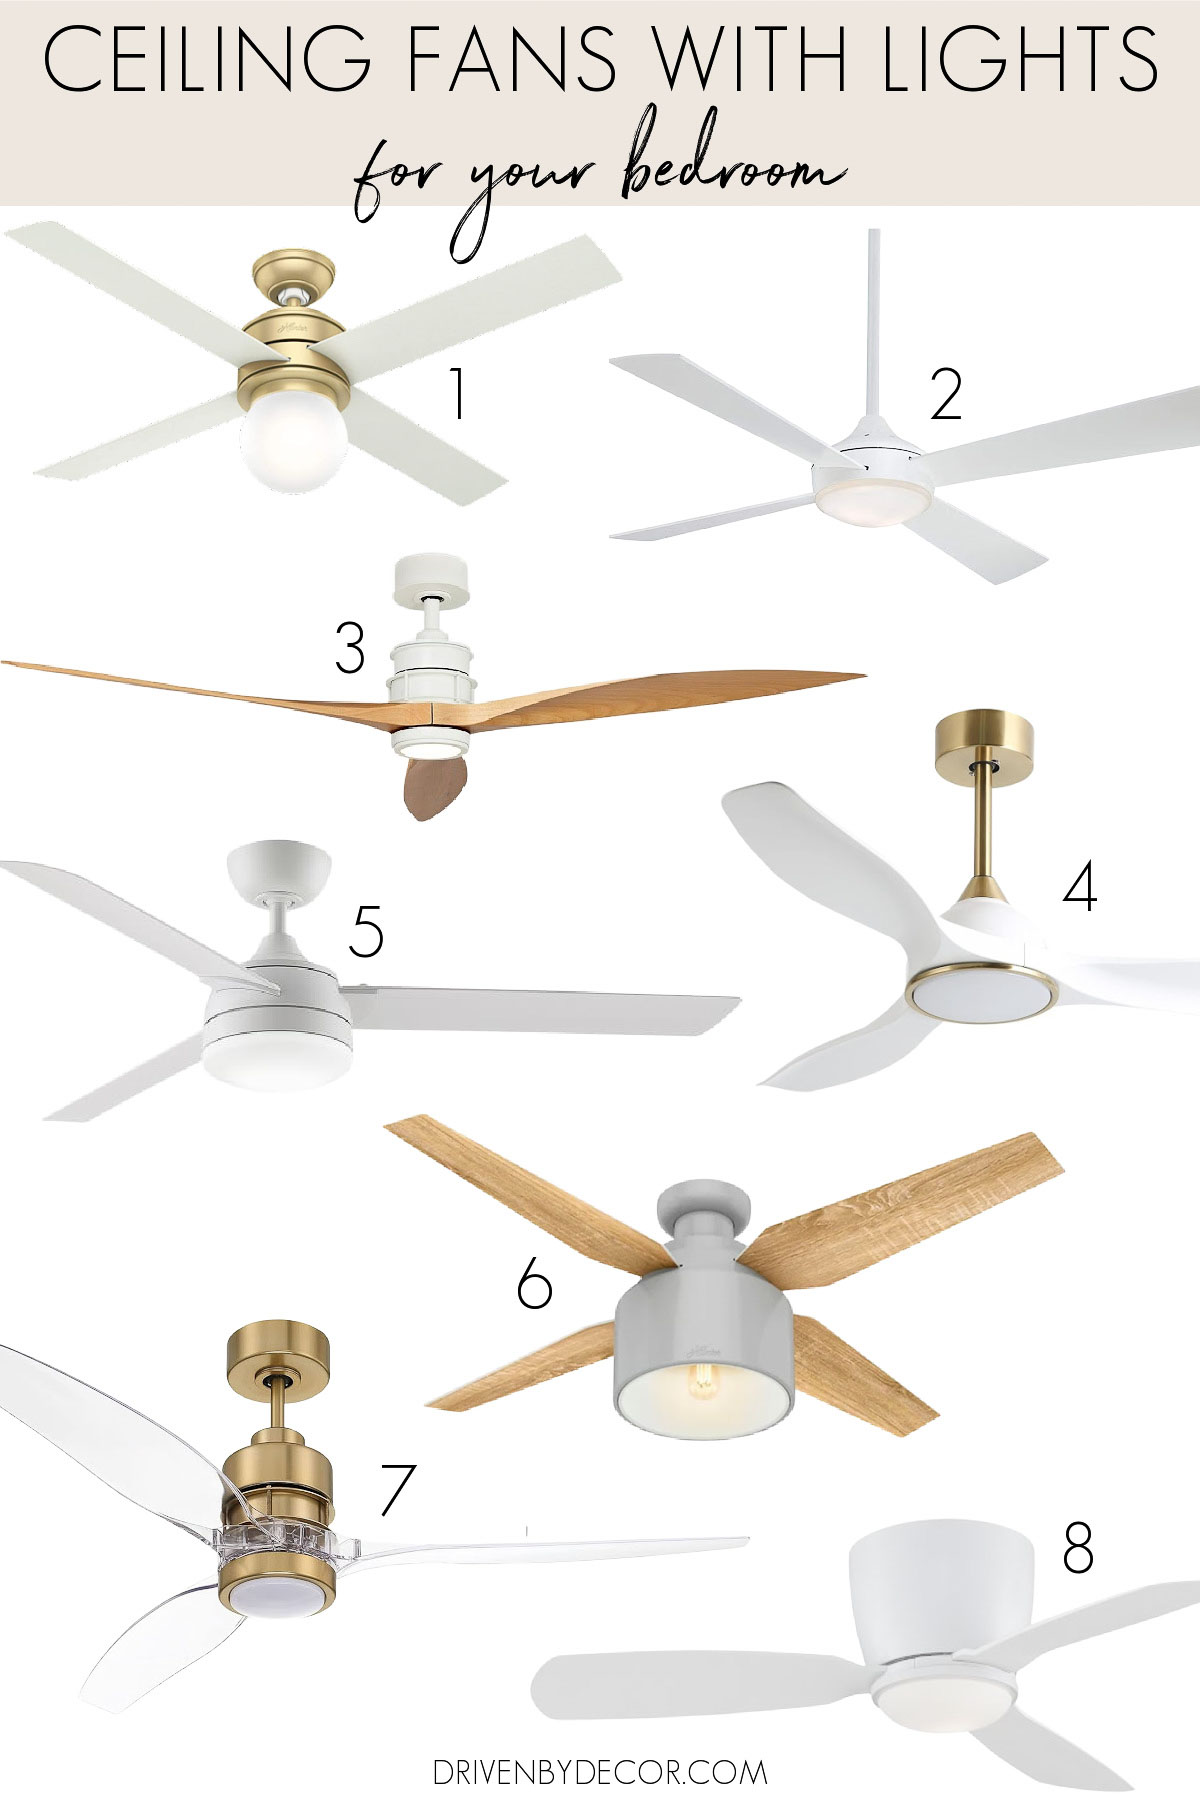 Bedroom ceiling fans with lights